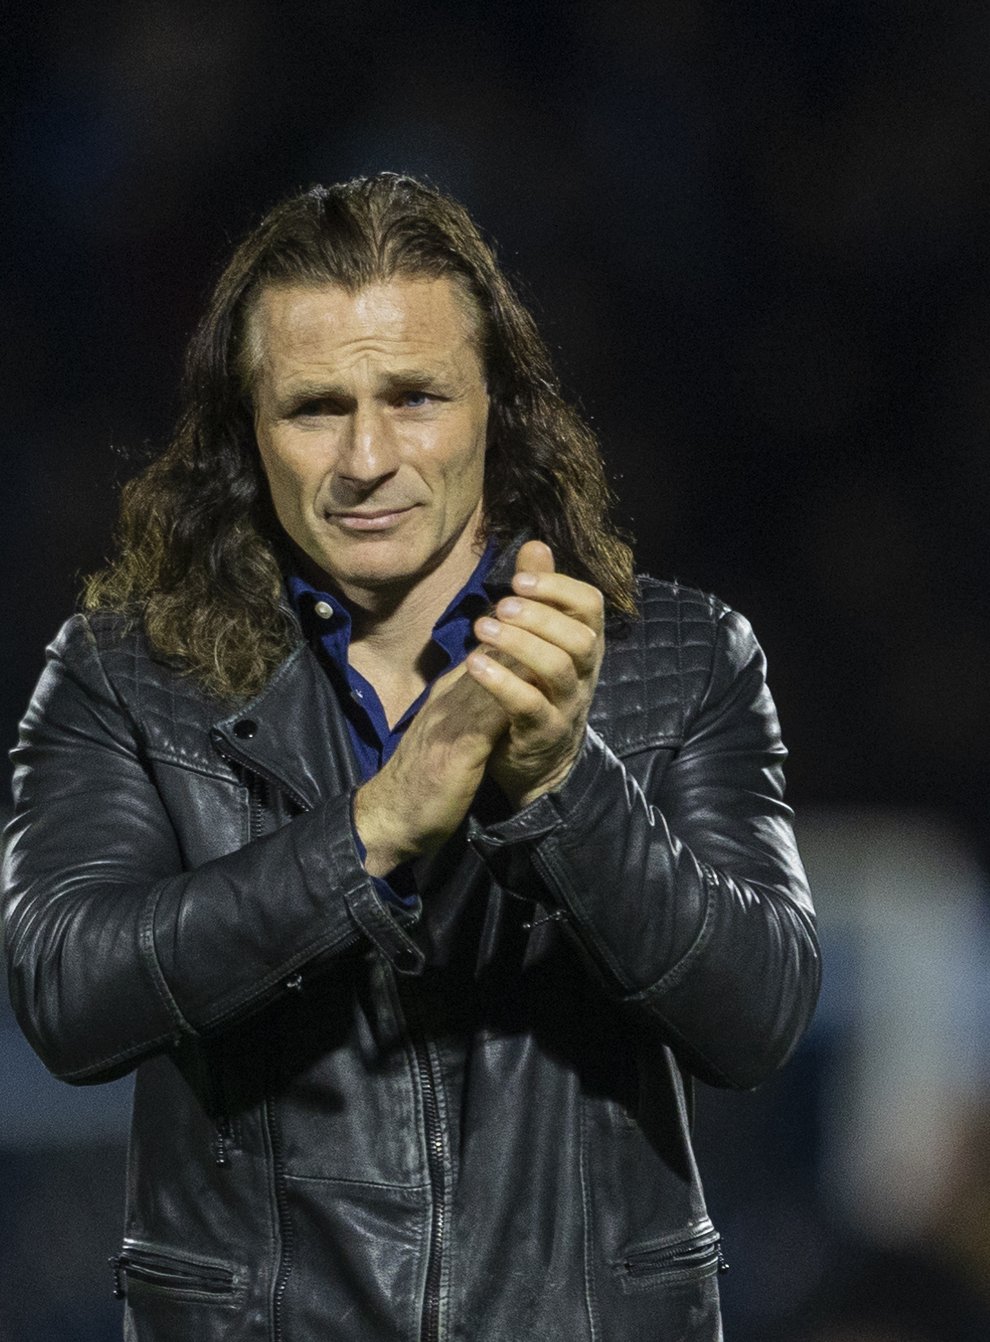 Wycombe Wanderers manager Gareth Ainsworth will be back in the dugout (Leila Coker/PA)